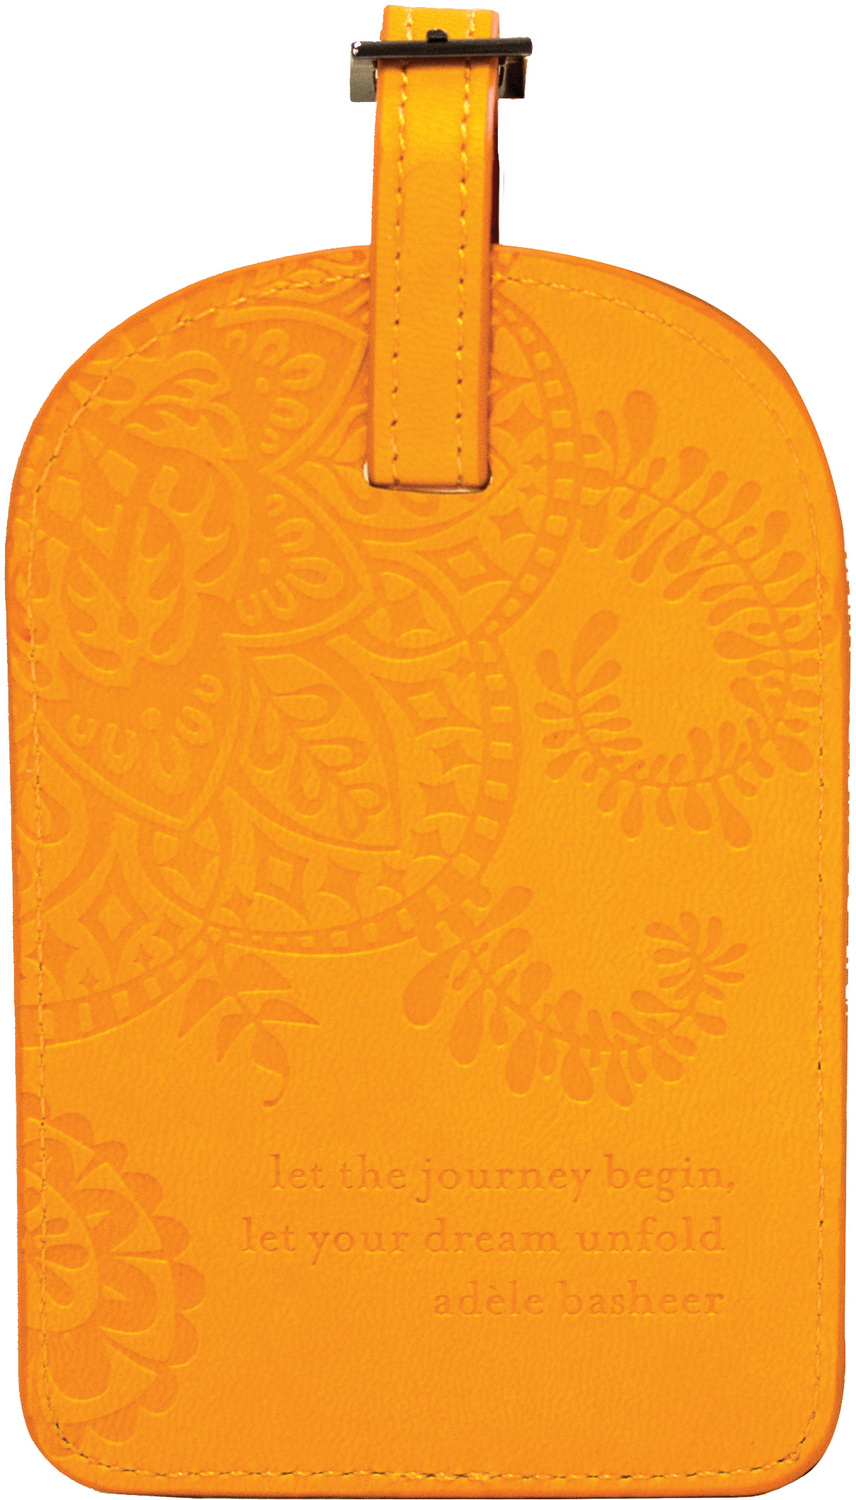 Marigold by Intrinsic - Marigold - Gift Boxed Vegan Leather Luggage Tag